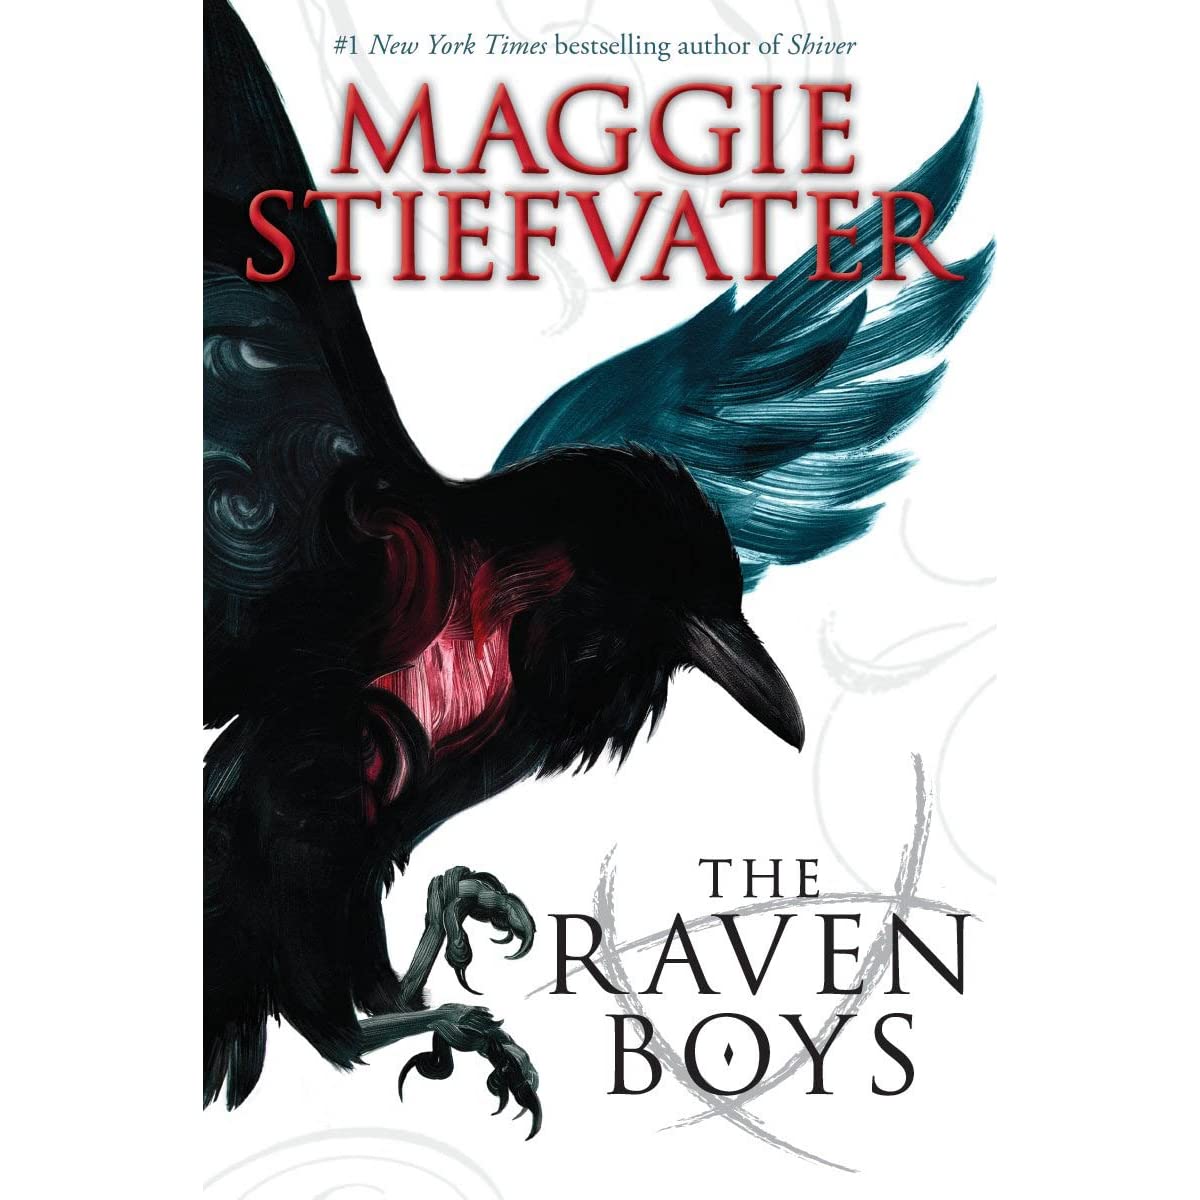 The Raven Boys by Maggie Stiefvater book cover. 